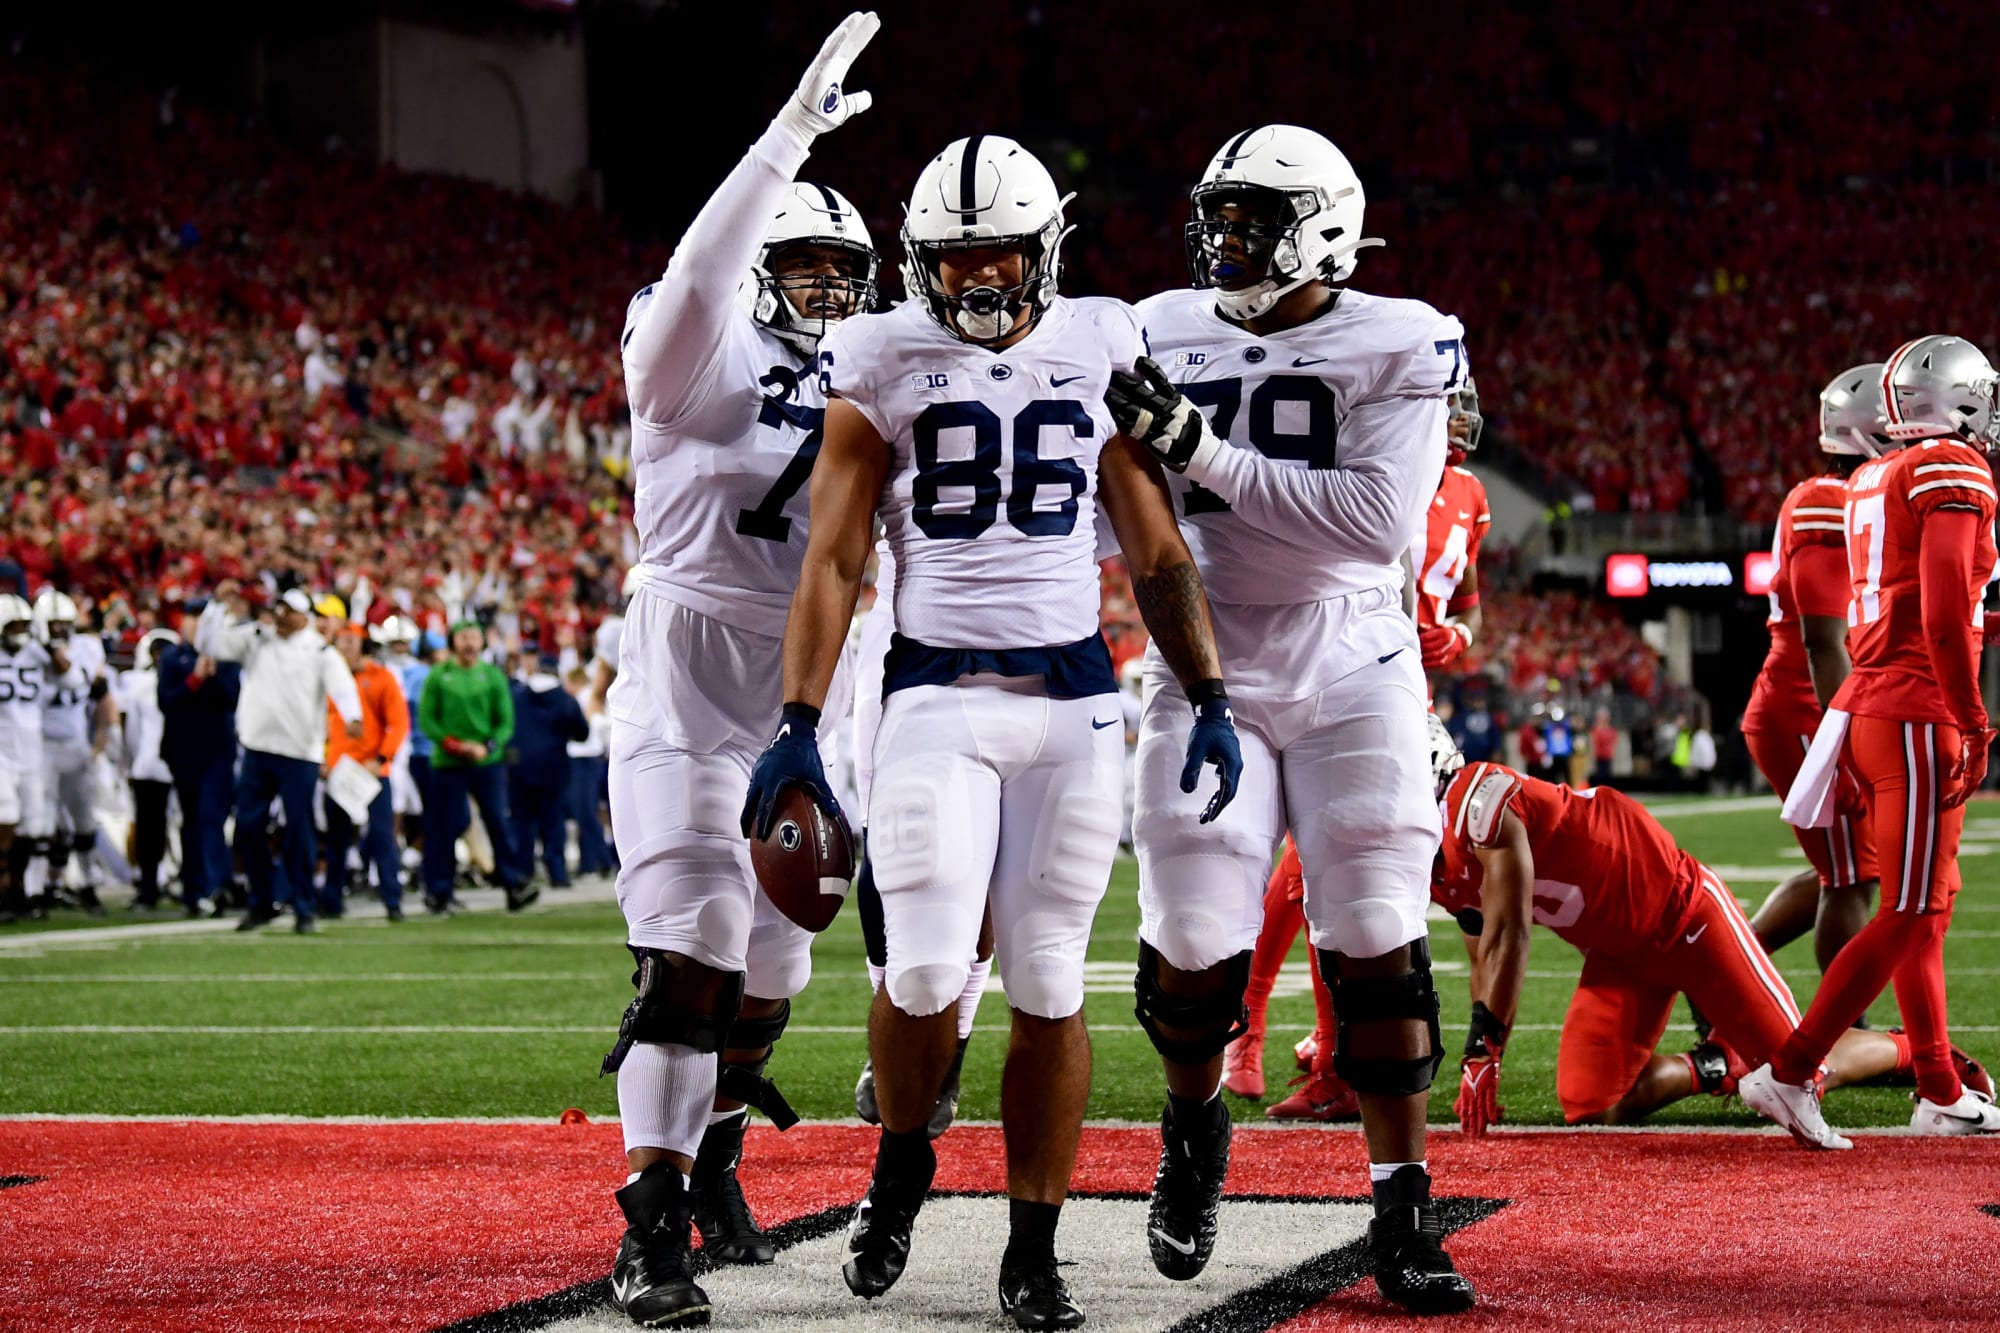 Penn State Football final depth chart projection for the offense in